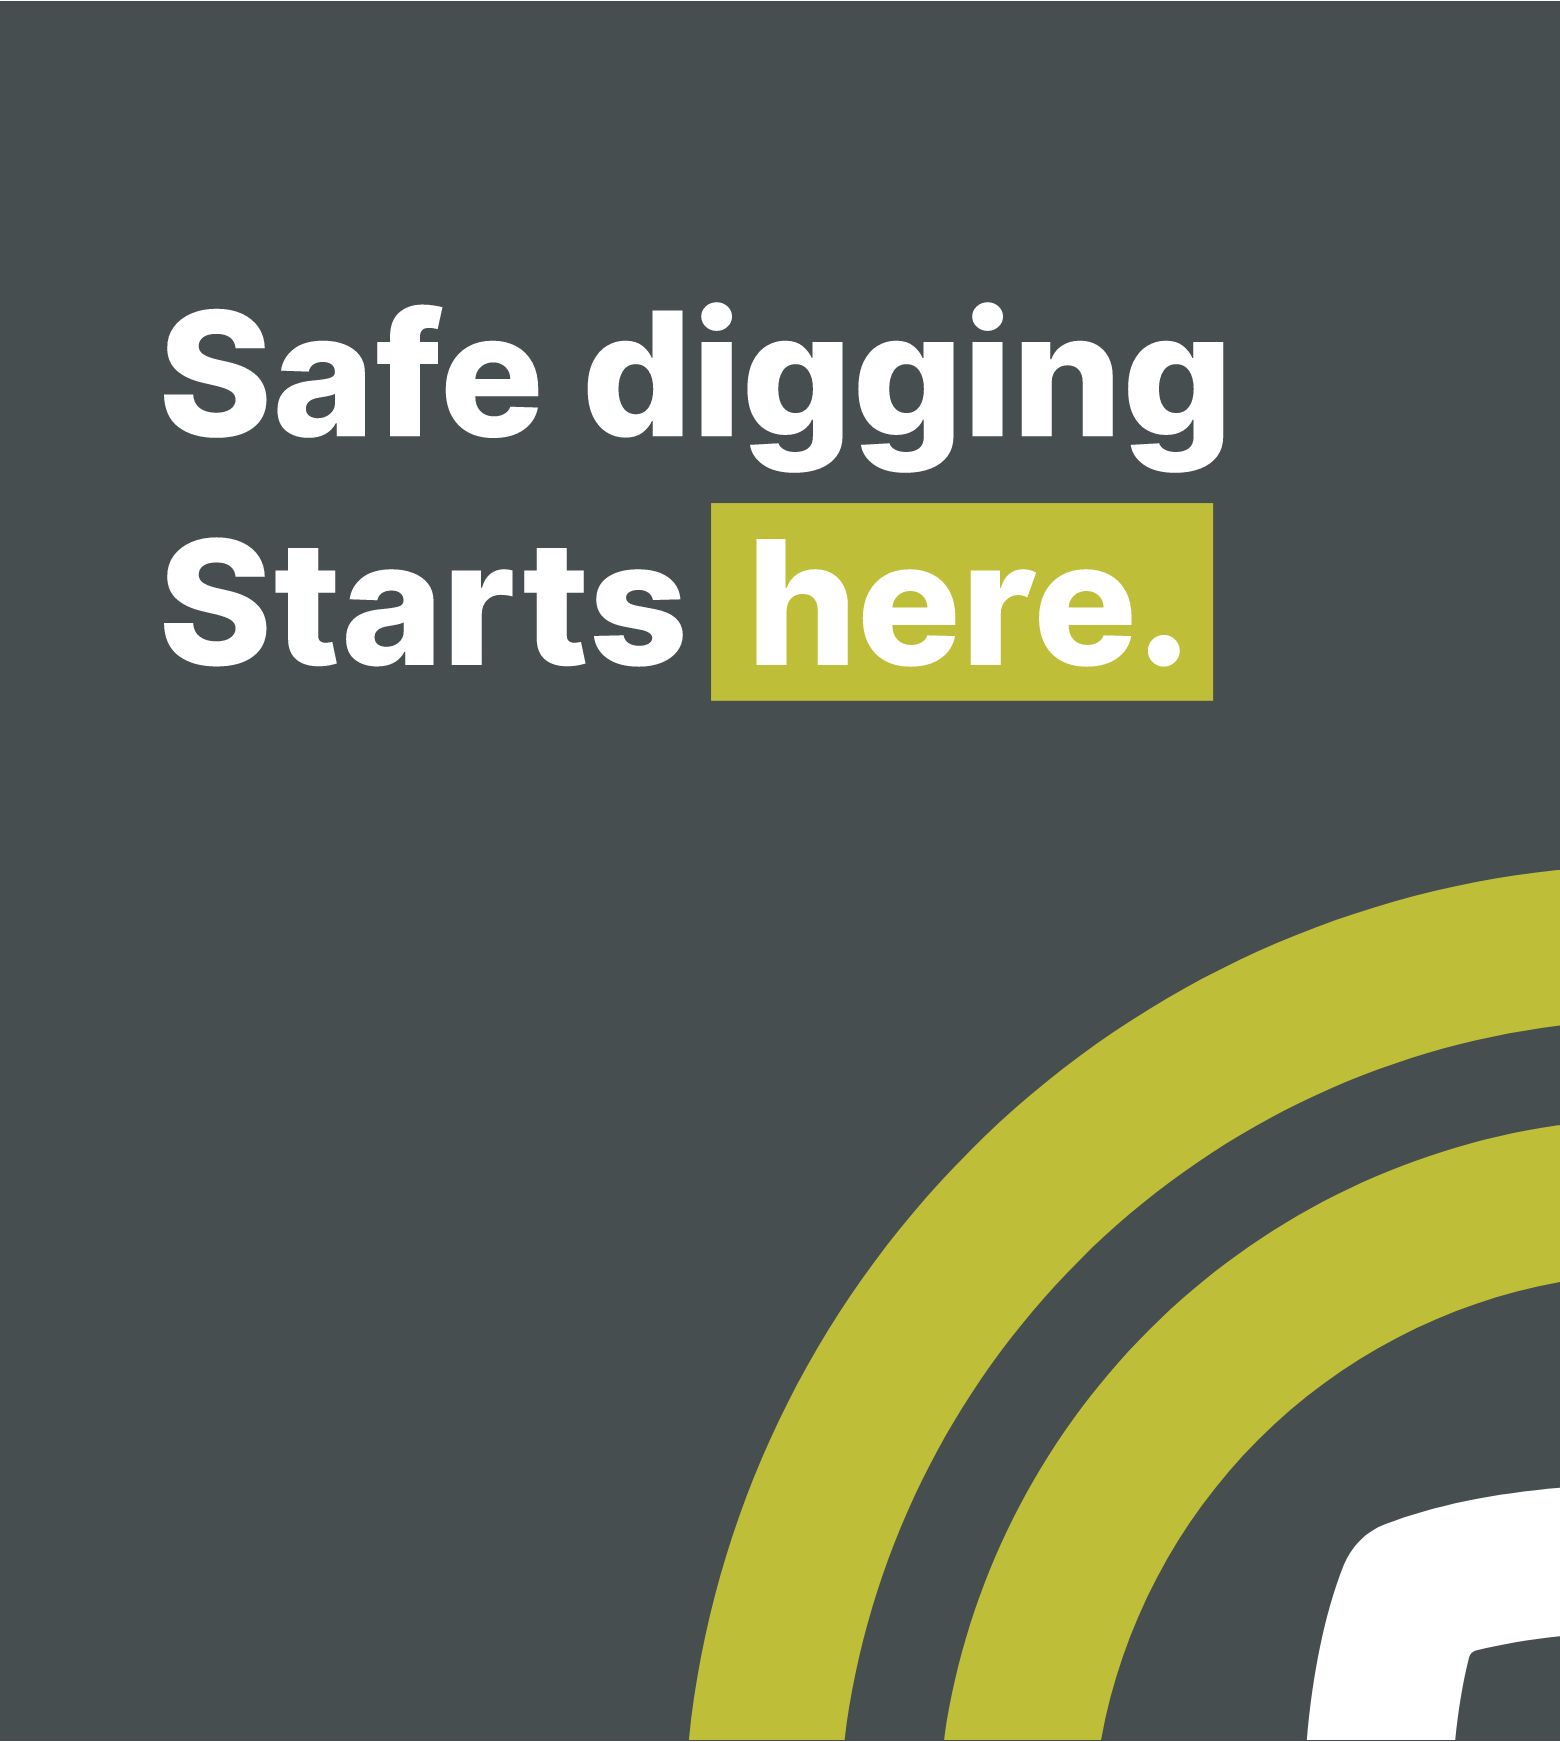 Image from UDig NY website "Safe digging starts here" with grey background, font is in white but "here" has a greenish background to stand out